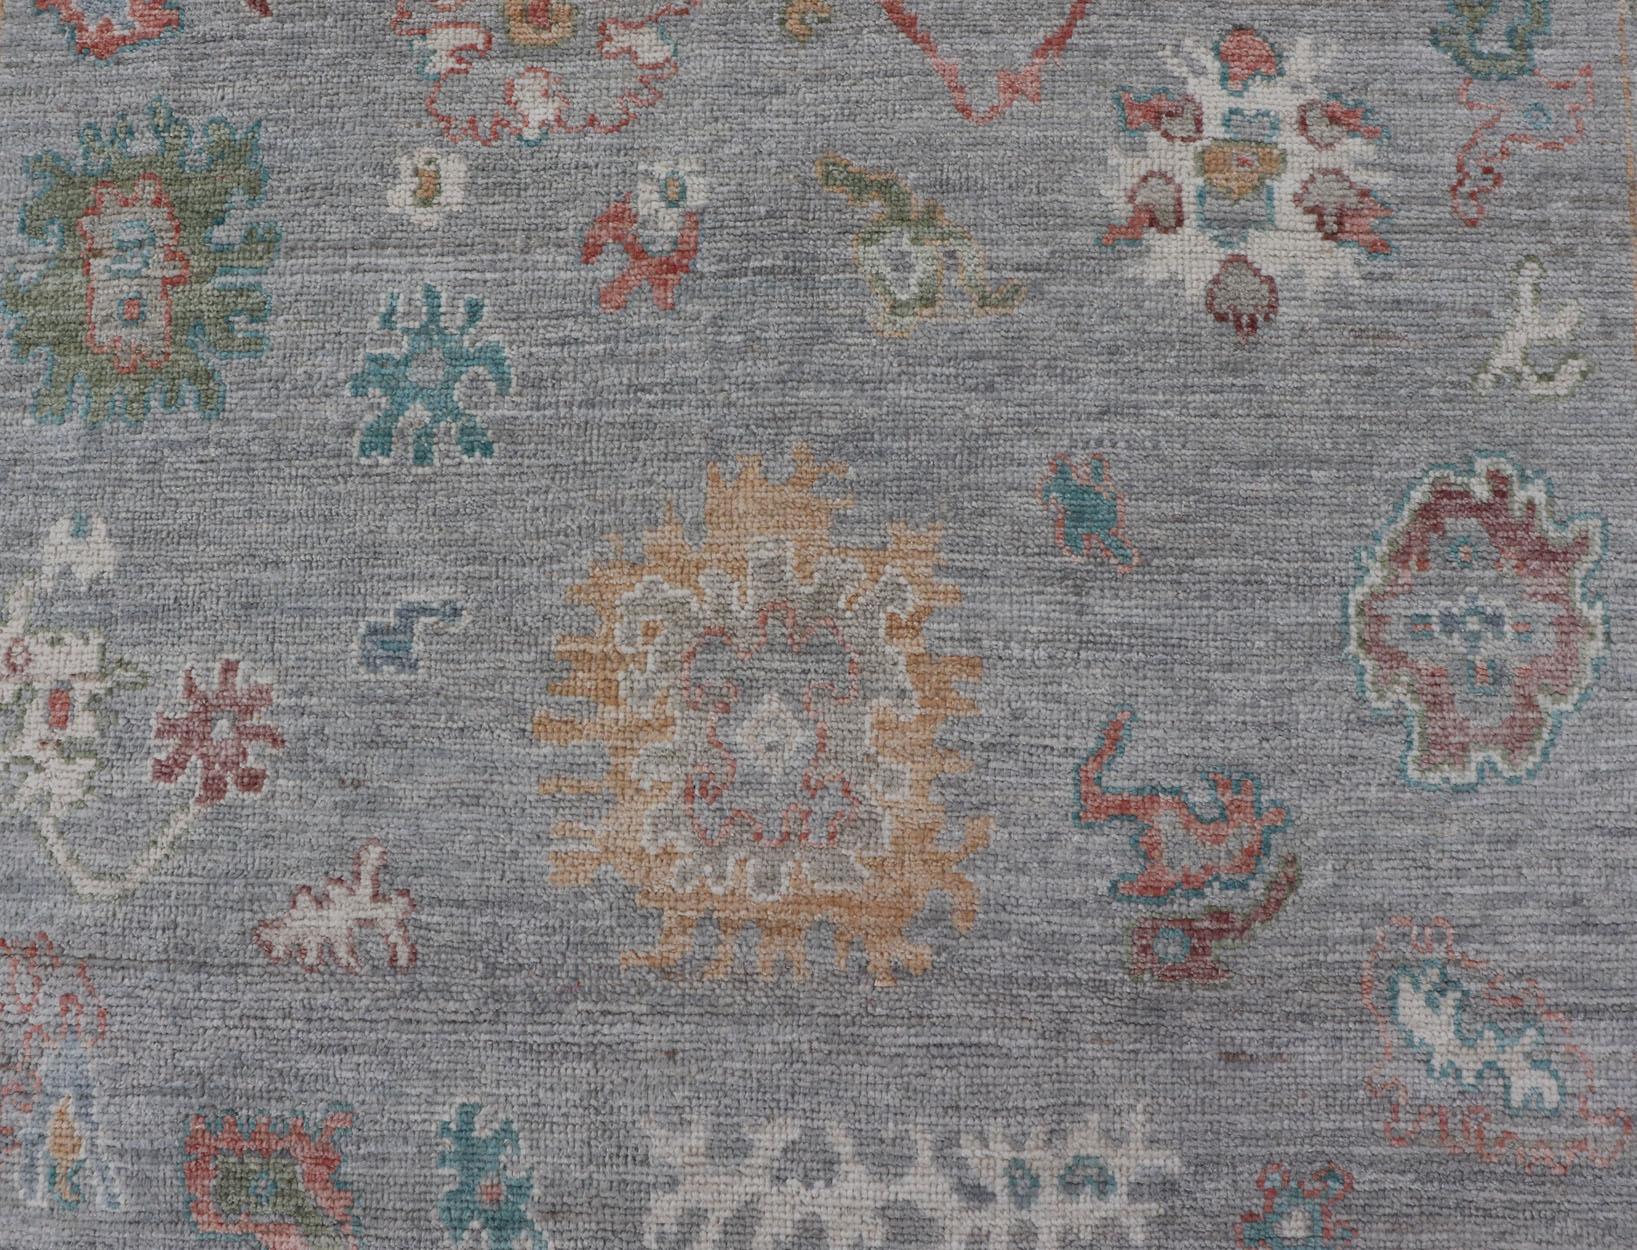 Measures: 5'8 x 9'0 
Hand Knotted Floral Modern Oushak With a Gray Background And Multi-Colors. Keivan Woven Arts; rug AWR-12167 / Country of Origin: Afghanistan Type: Oushak Design: Floral, All-Over, Abstract

This modern casual floral Oushak